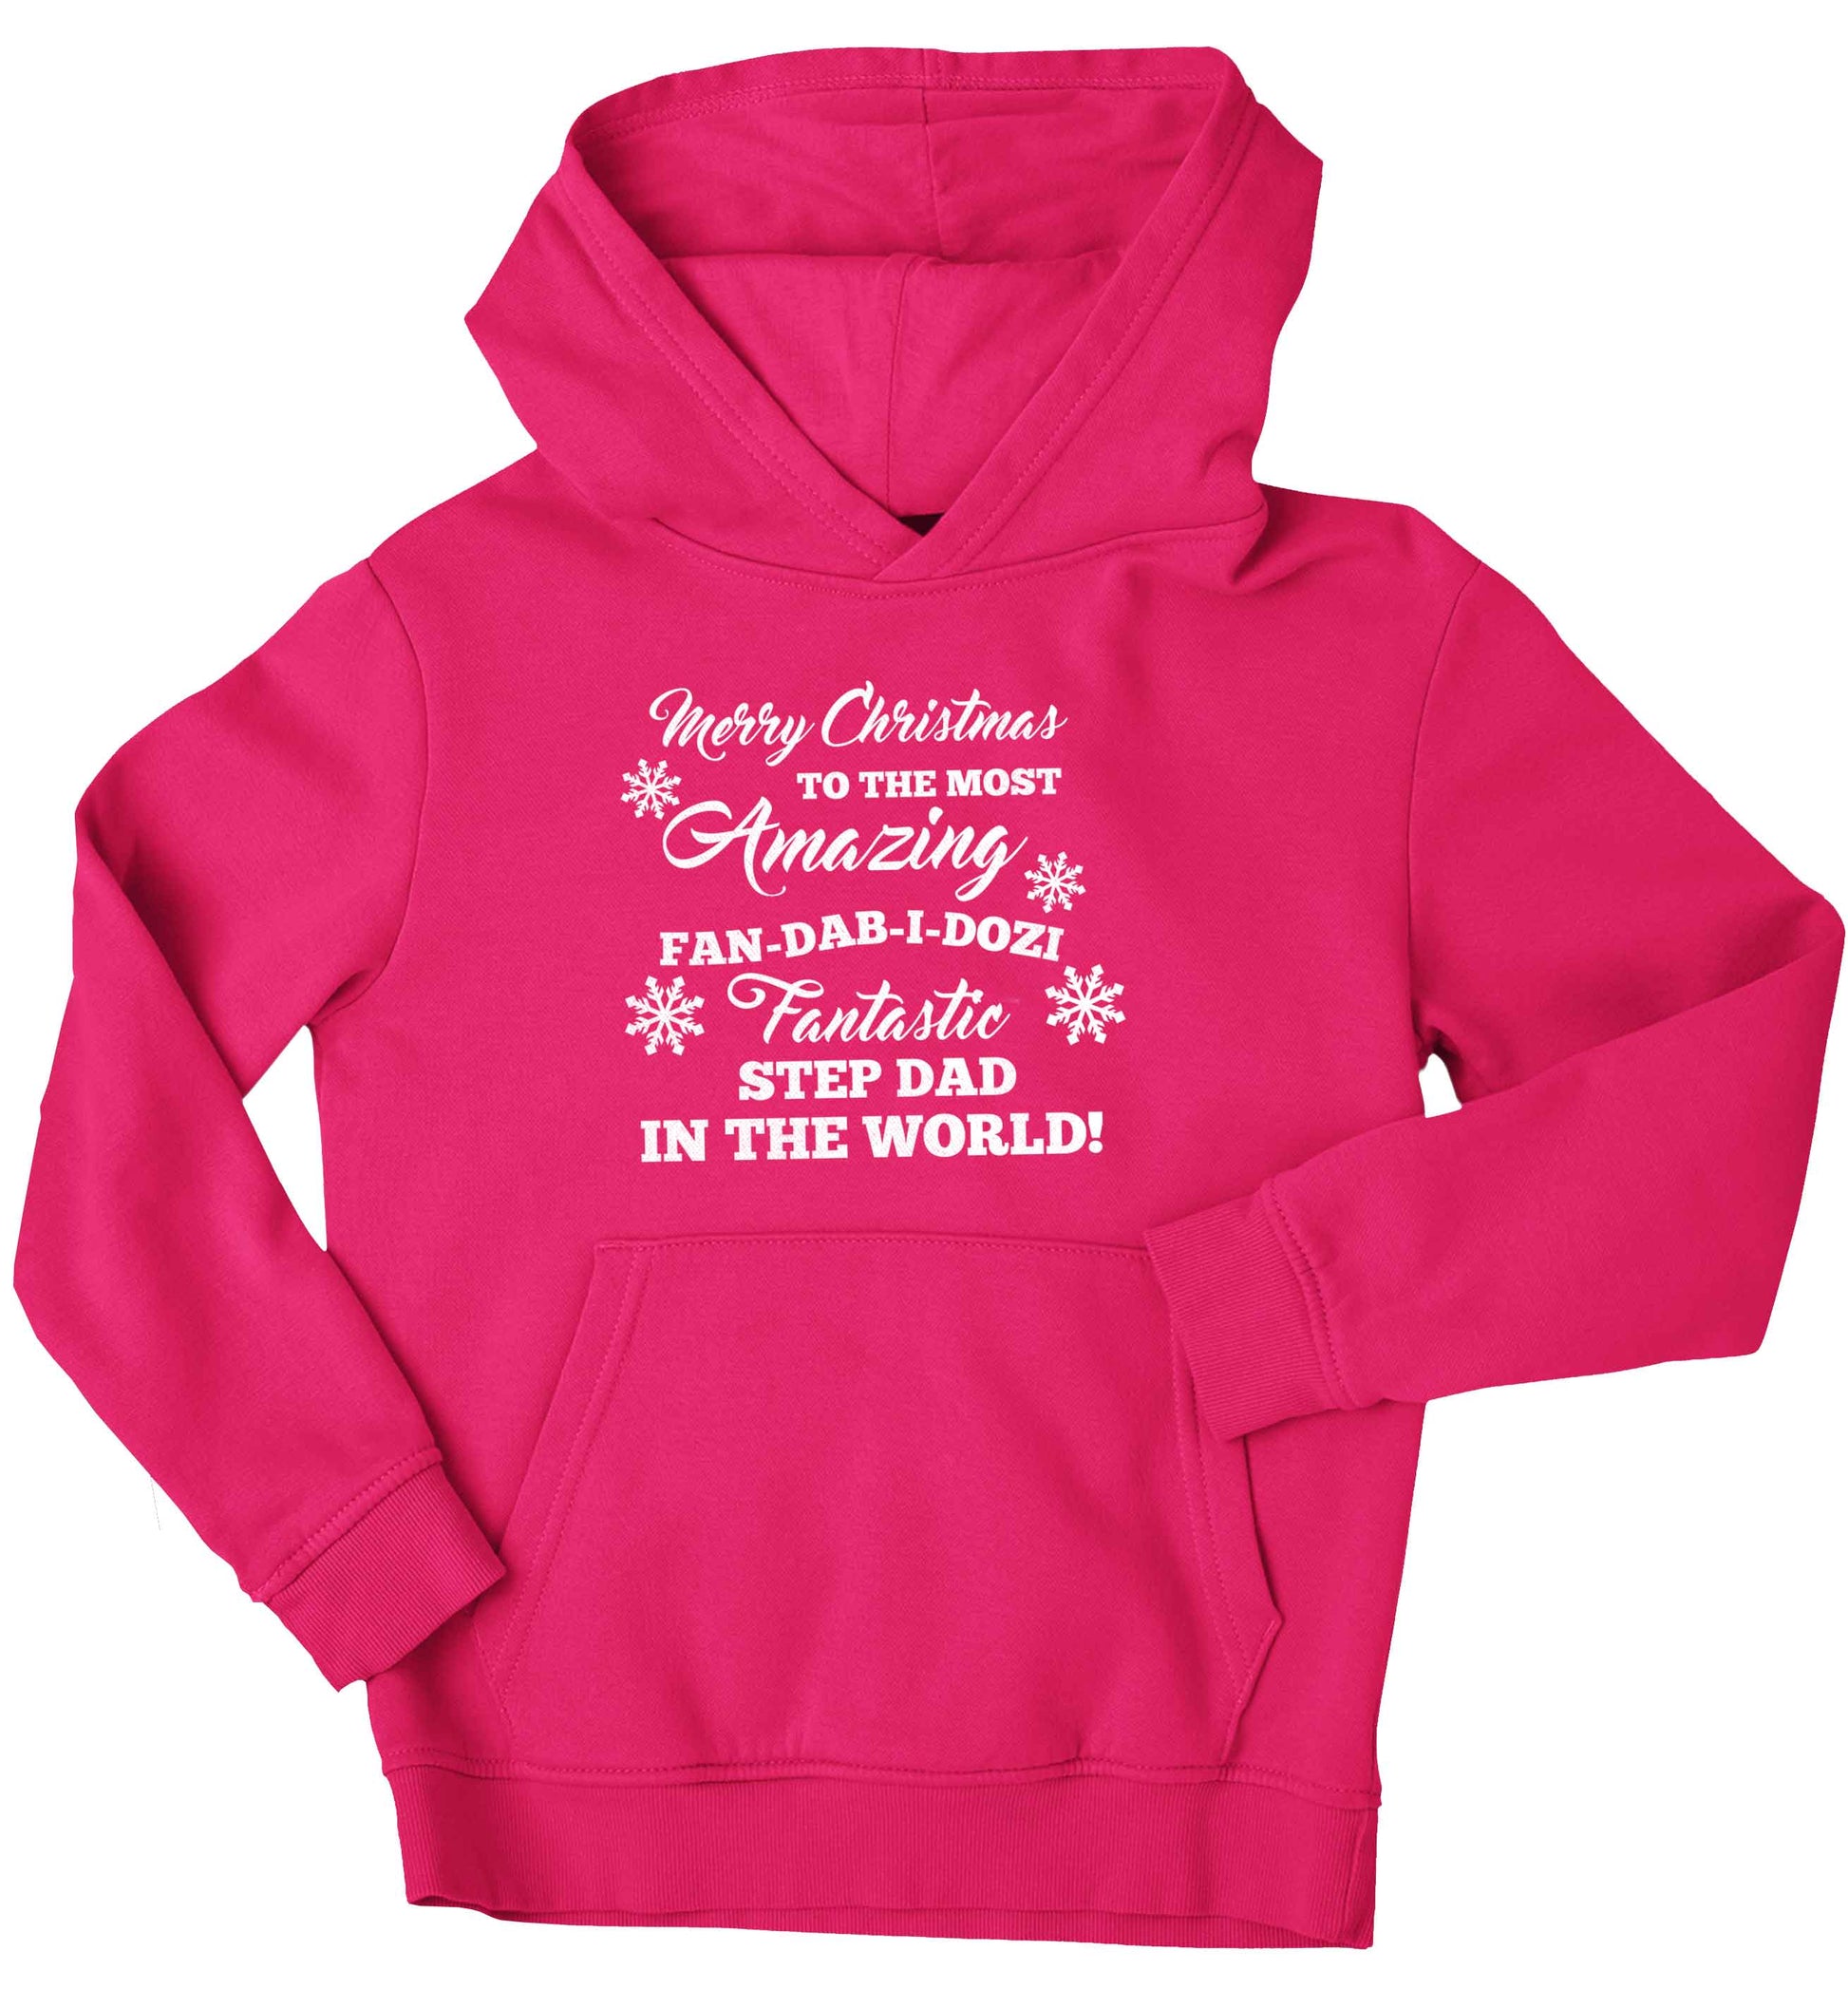 Merry Christmas to the most amazing fan-dab-i-dozi fantasic Step Dad in the world children's pink hoodie 12-13 Years